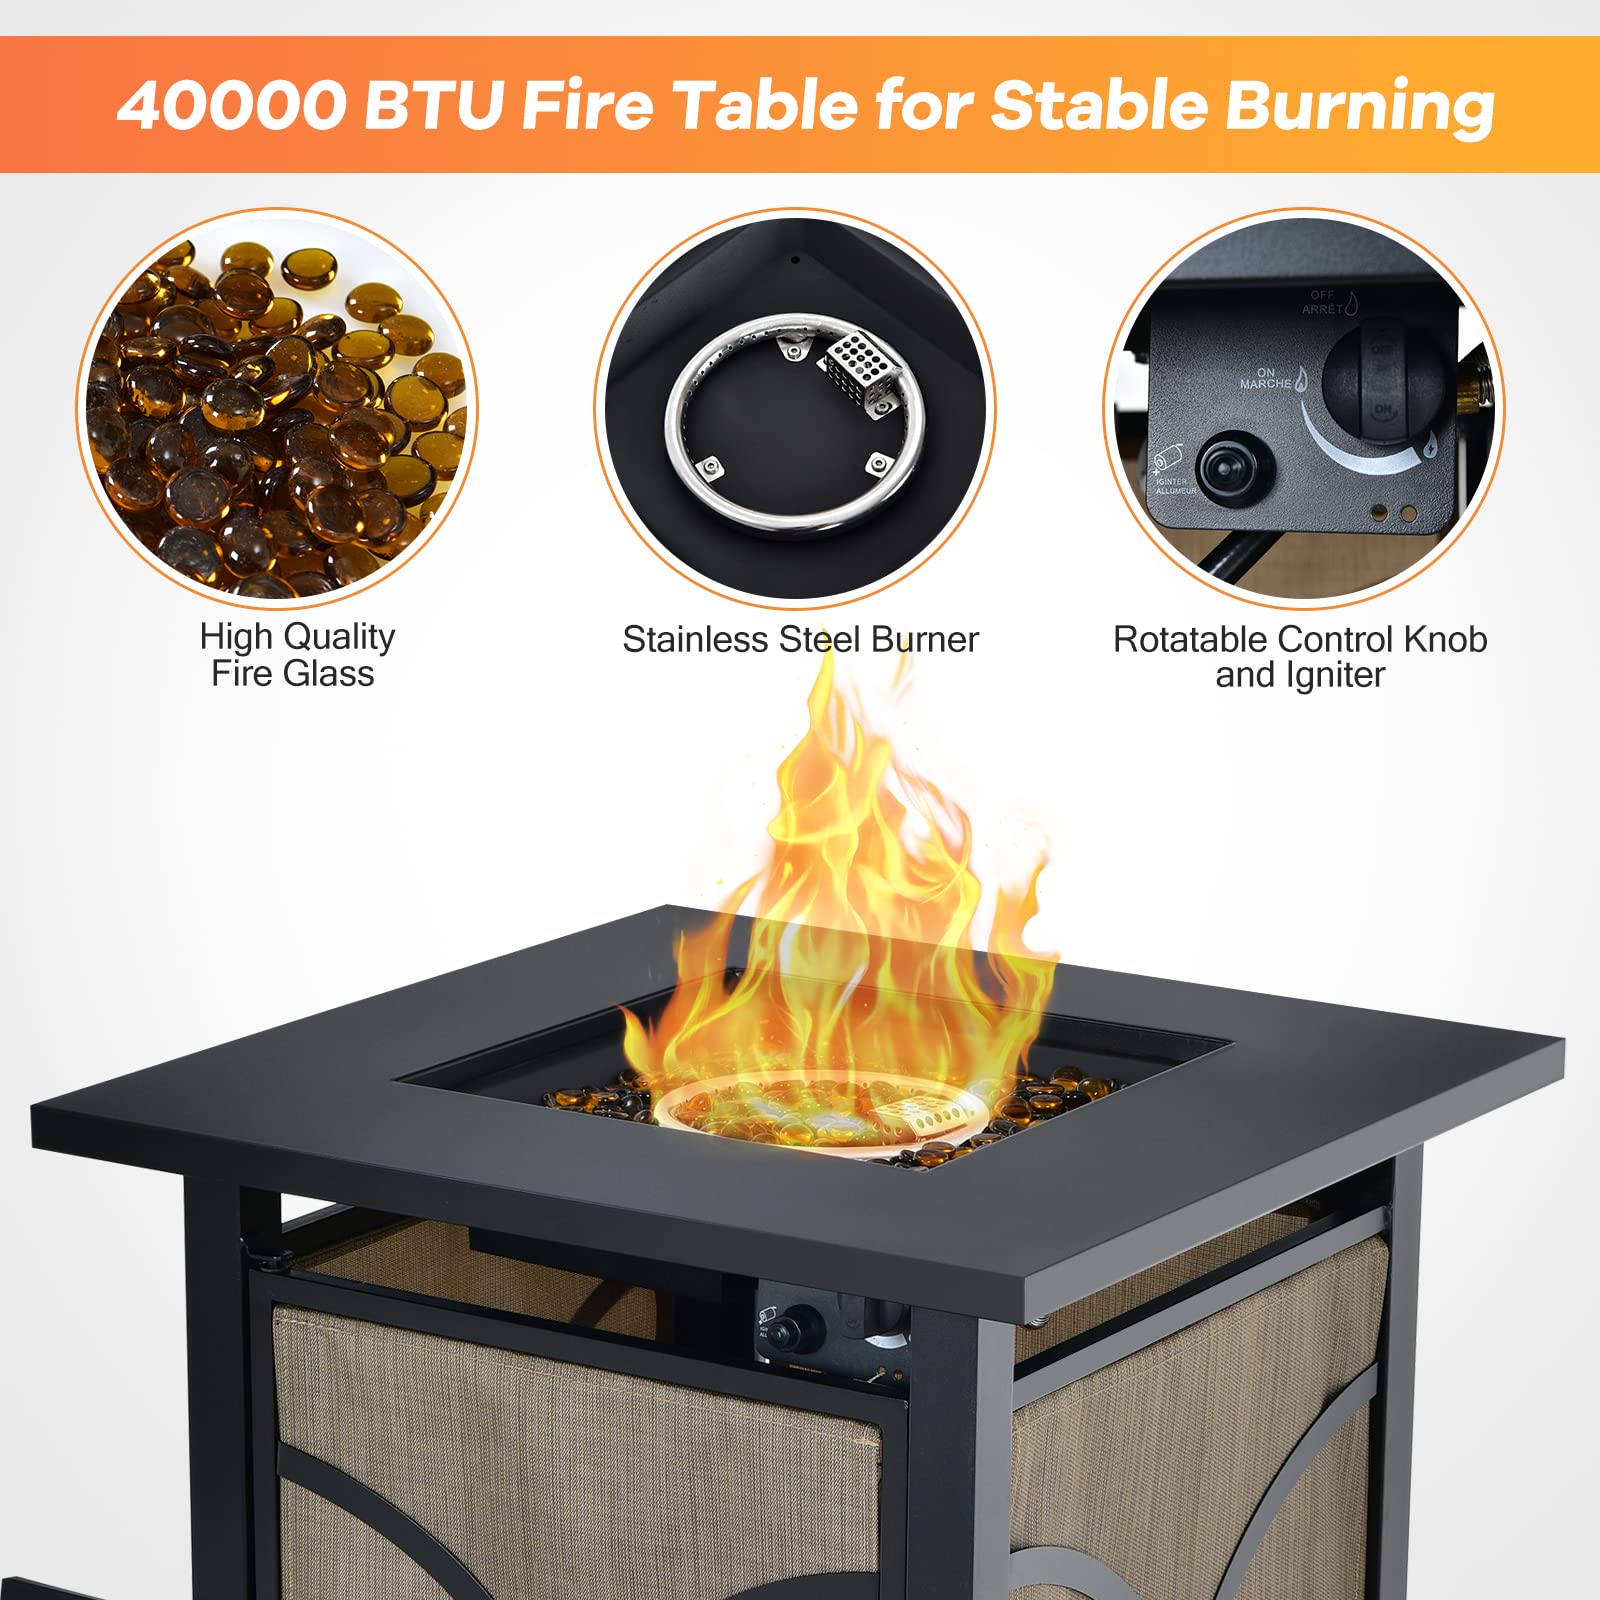 Giantex 25-Inch Propane Fire Pit Table, 40000 BTU Square Gas Firepit Table with Lid, Fire Glass and Adjustable Flame, CSA Approved, 2-in-1 Outdoor Fire Table for Patio and Garden